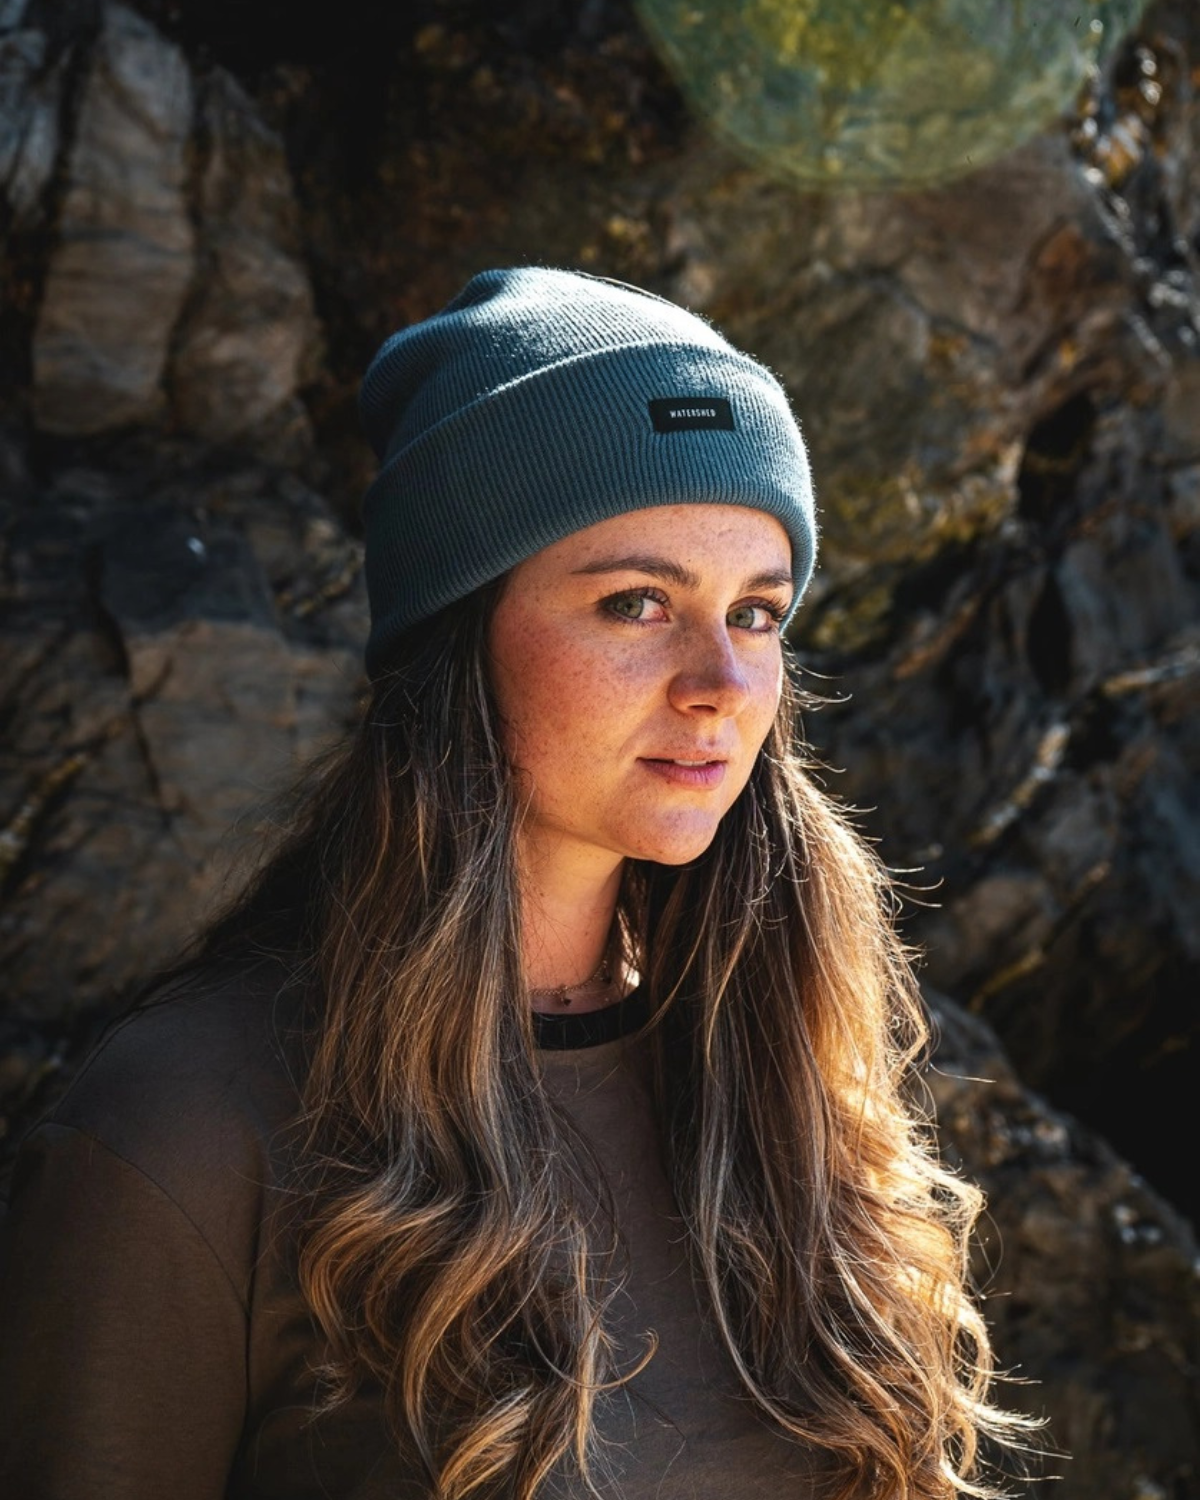 Watershed Issue Beanie - Petrol Blue